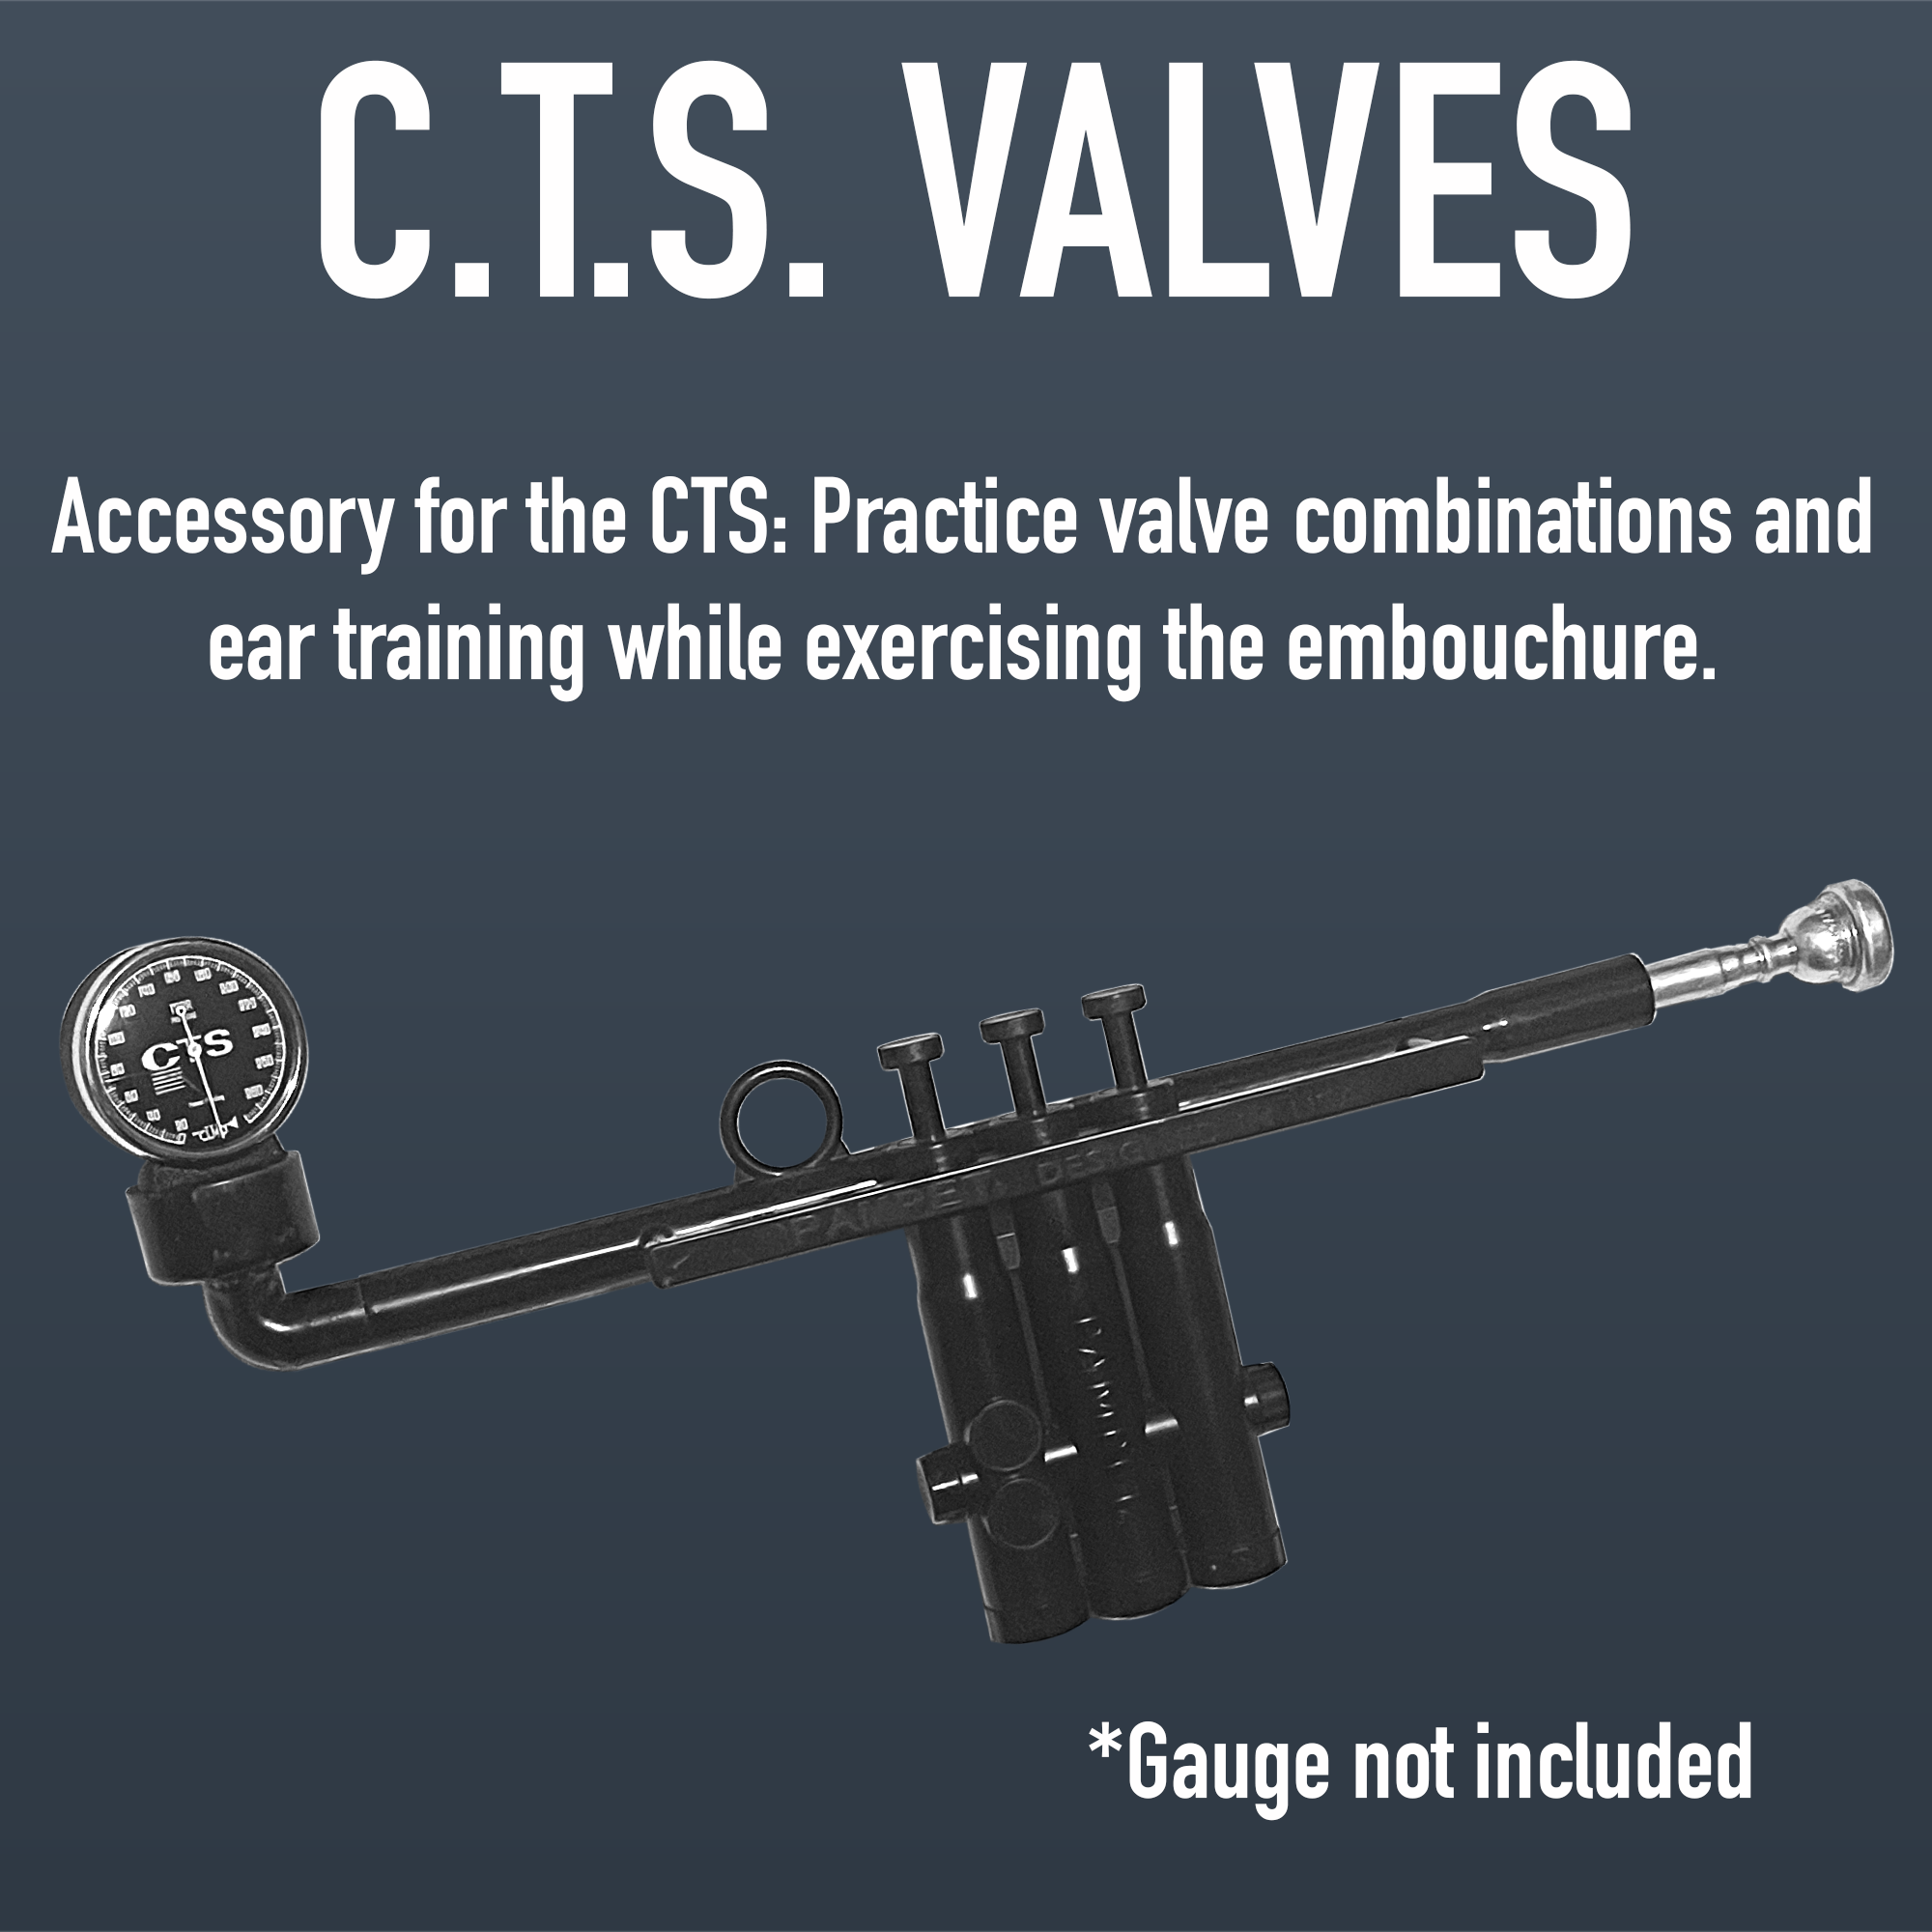 CTS Valves - Practice valve combinations and ear training while exercising the embouchure